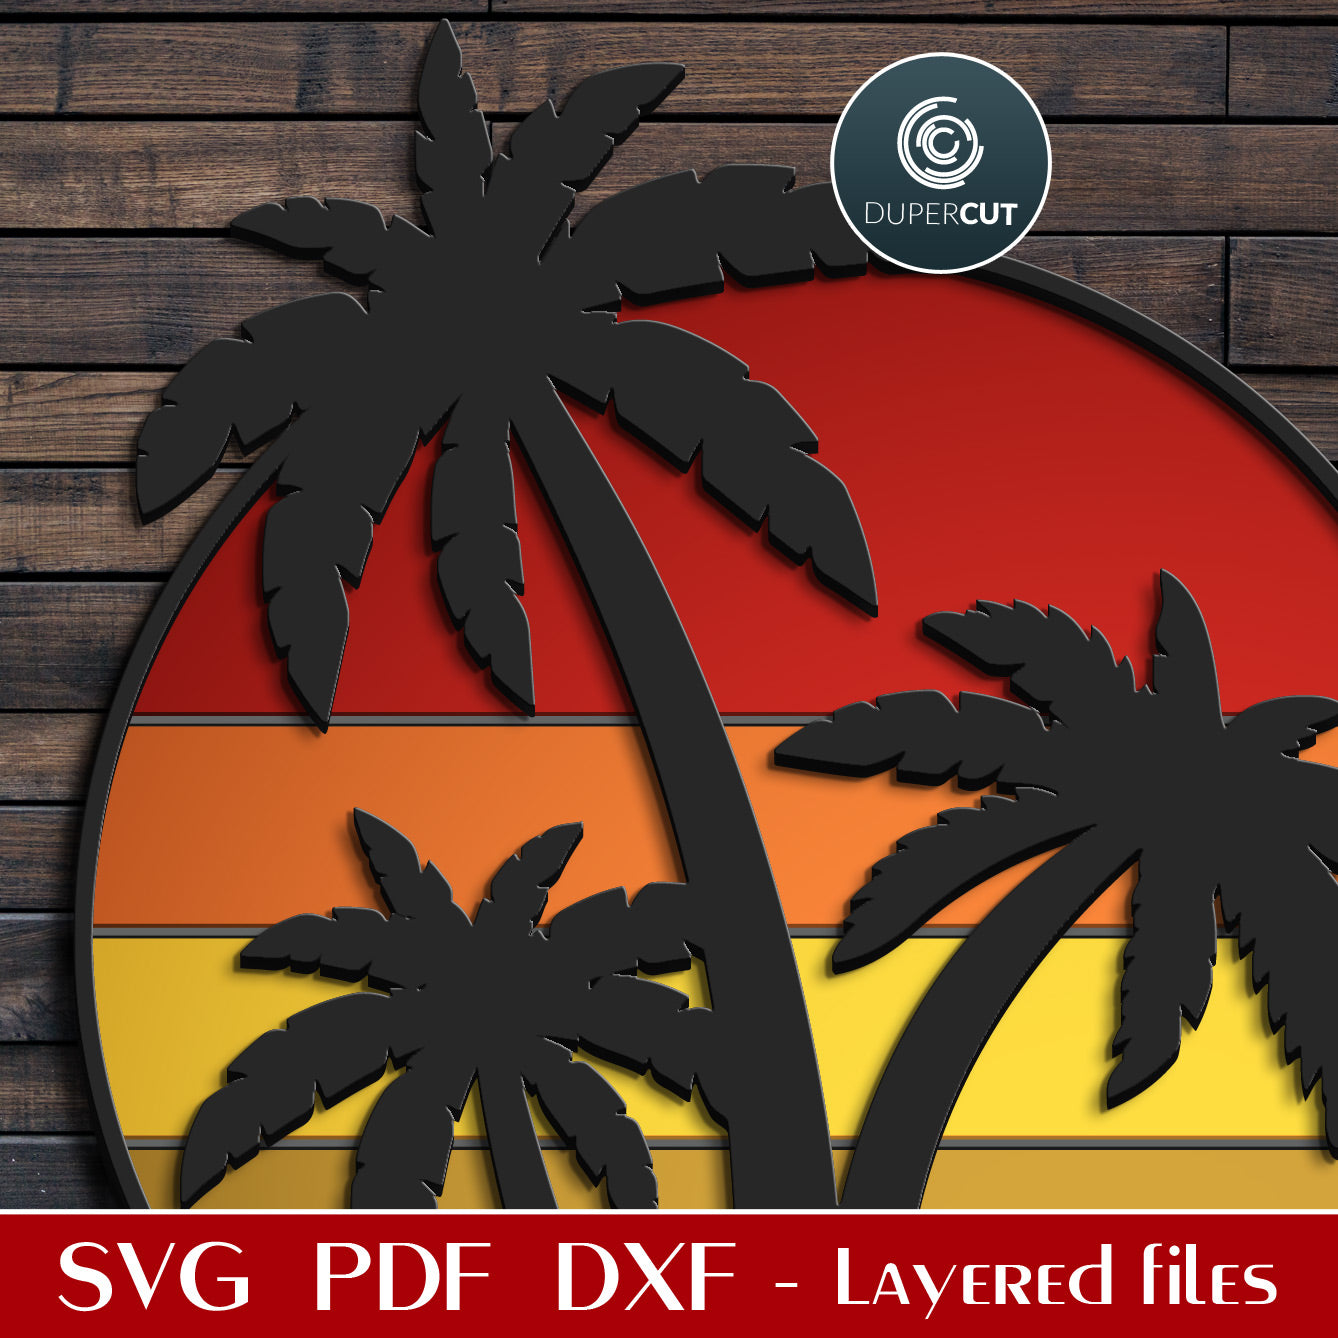 Palm trees retro sunset welcome sign - SVG DXF layered cutting files for Glowforge, Cricut, Silhouette, CNC plasma machines pattern by DuperCut